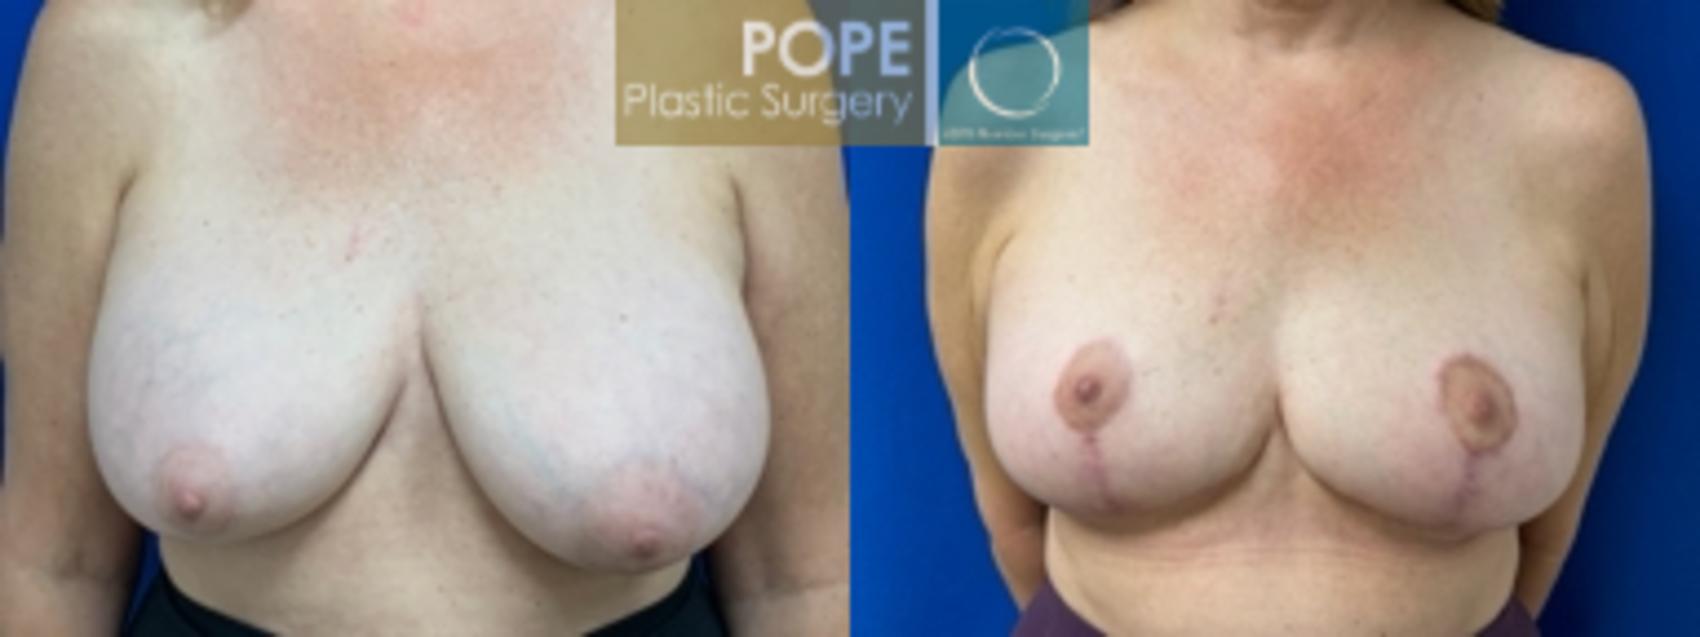 58 year old woman who had a mastopexy and implant replacement, with adjustment of implant volumes to achieve symmetry. (200cc on left, 270cc on right)